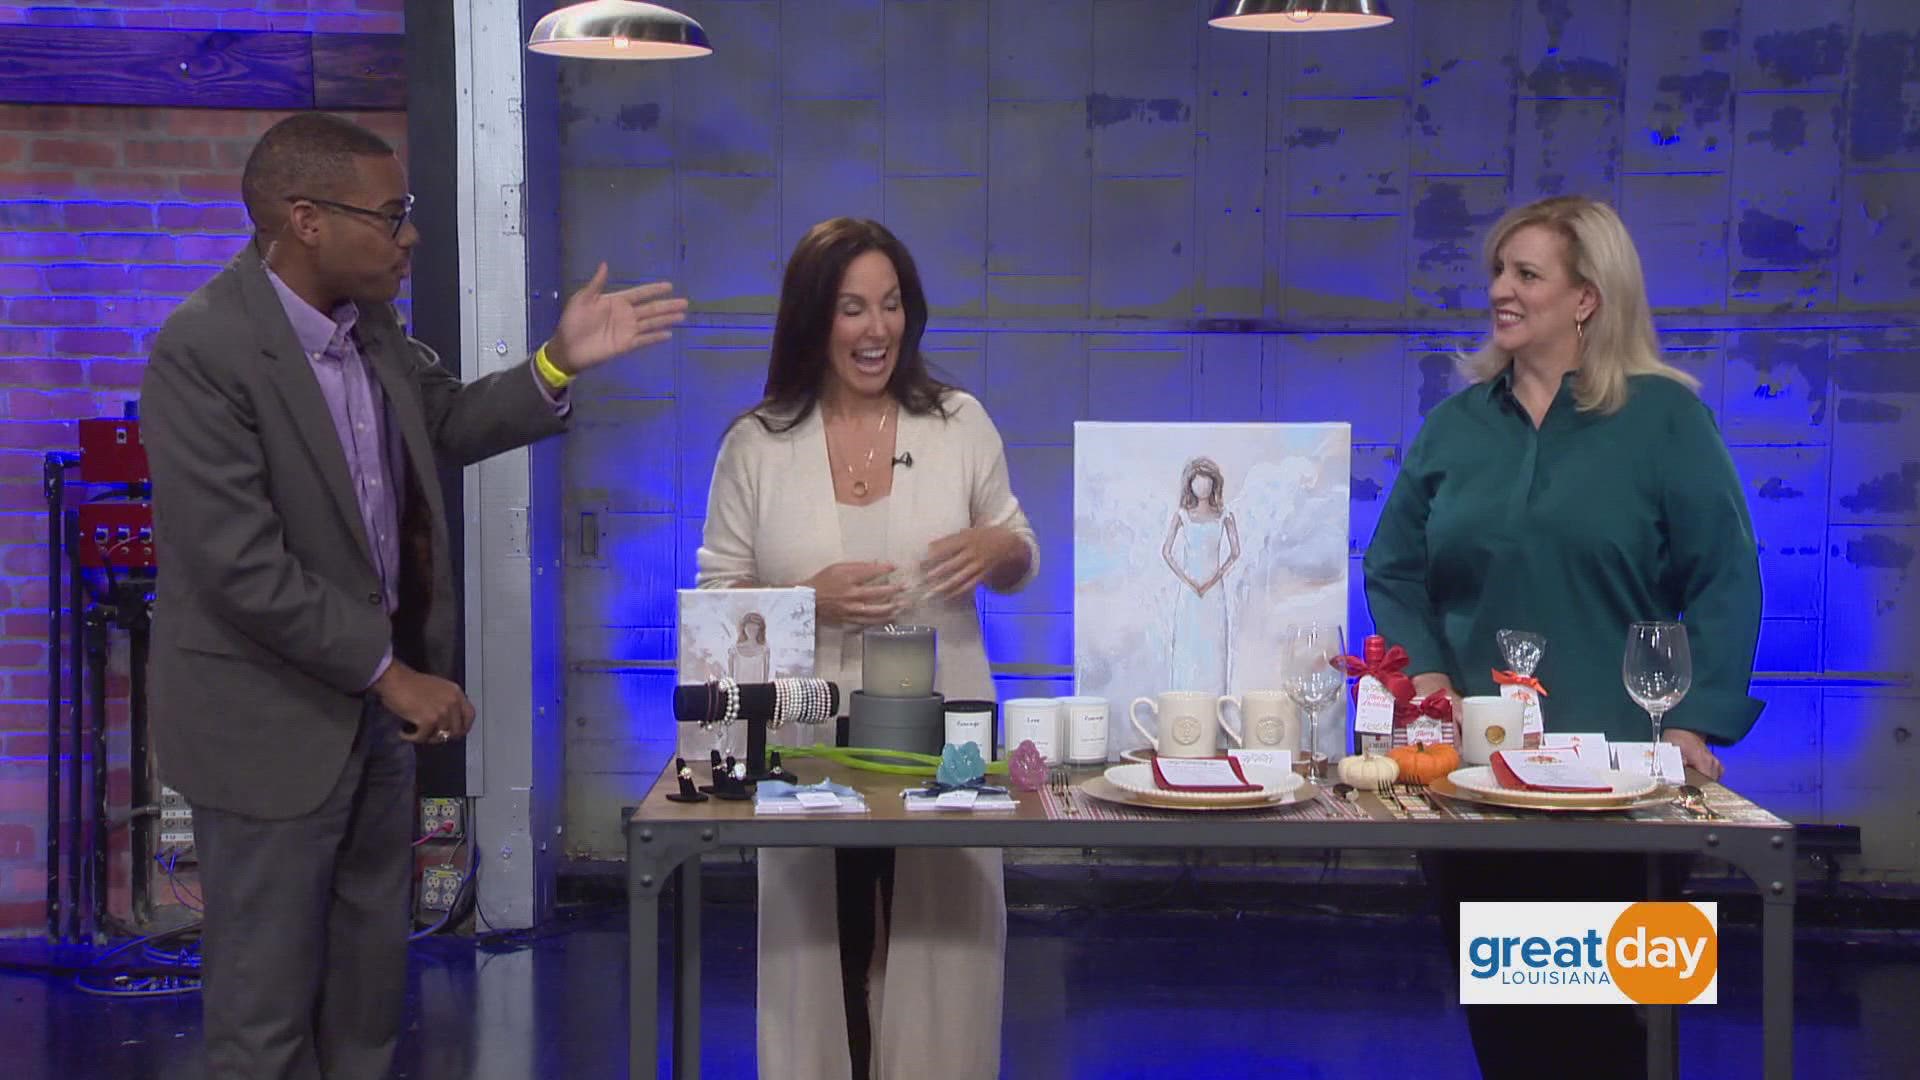 Former WWL-TV anchor, Karen Swenson, shared details about her lifestyle line that includes candles and paintings.